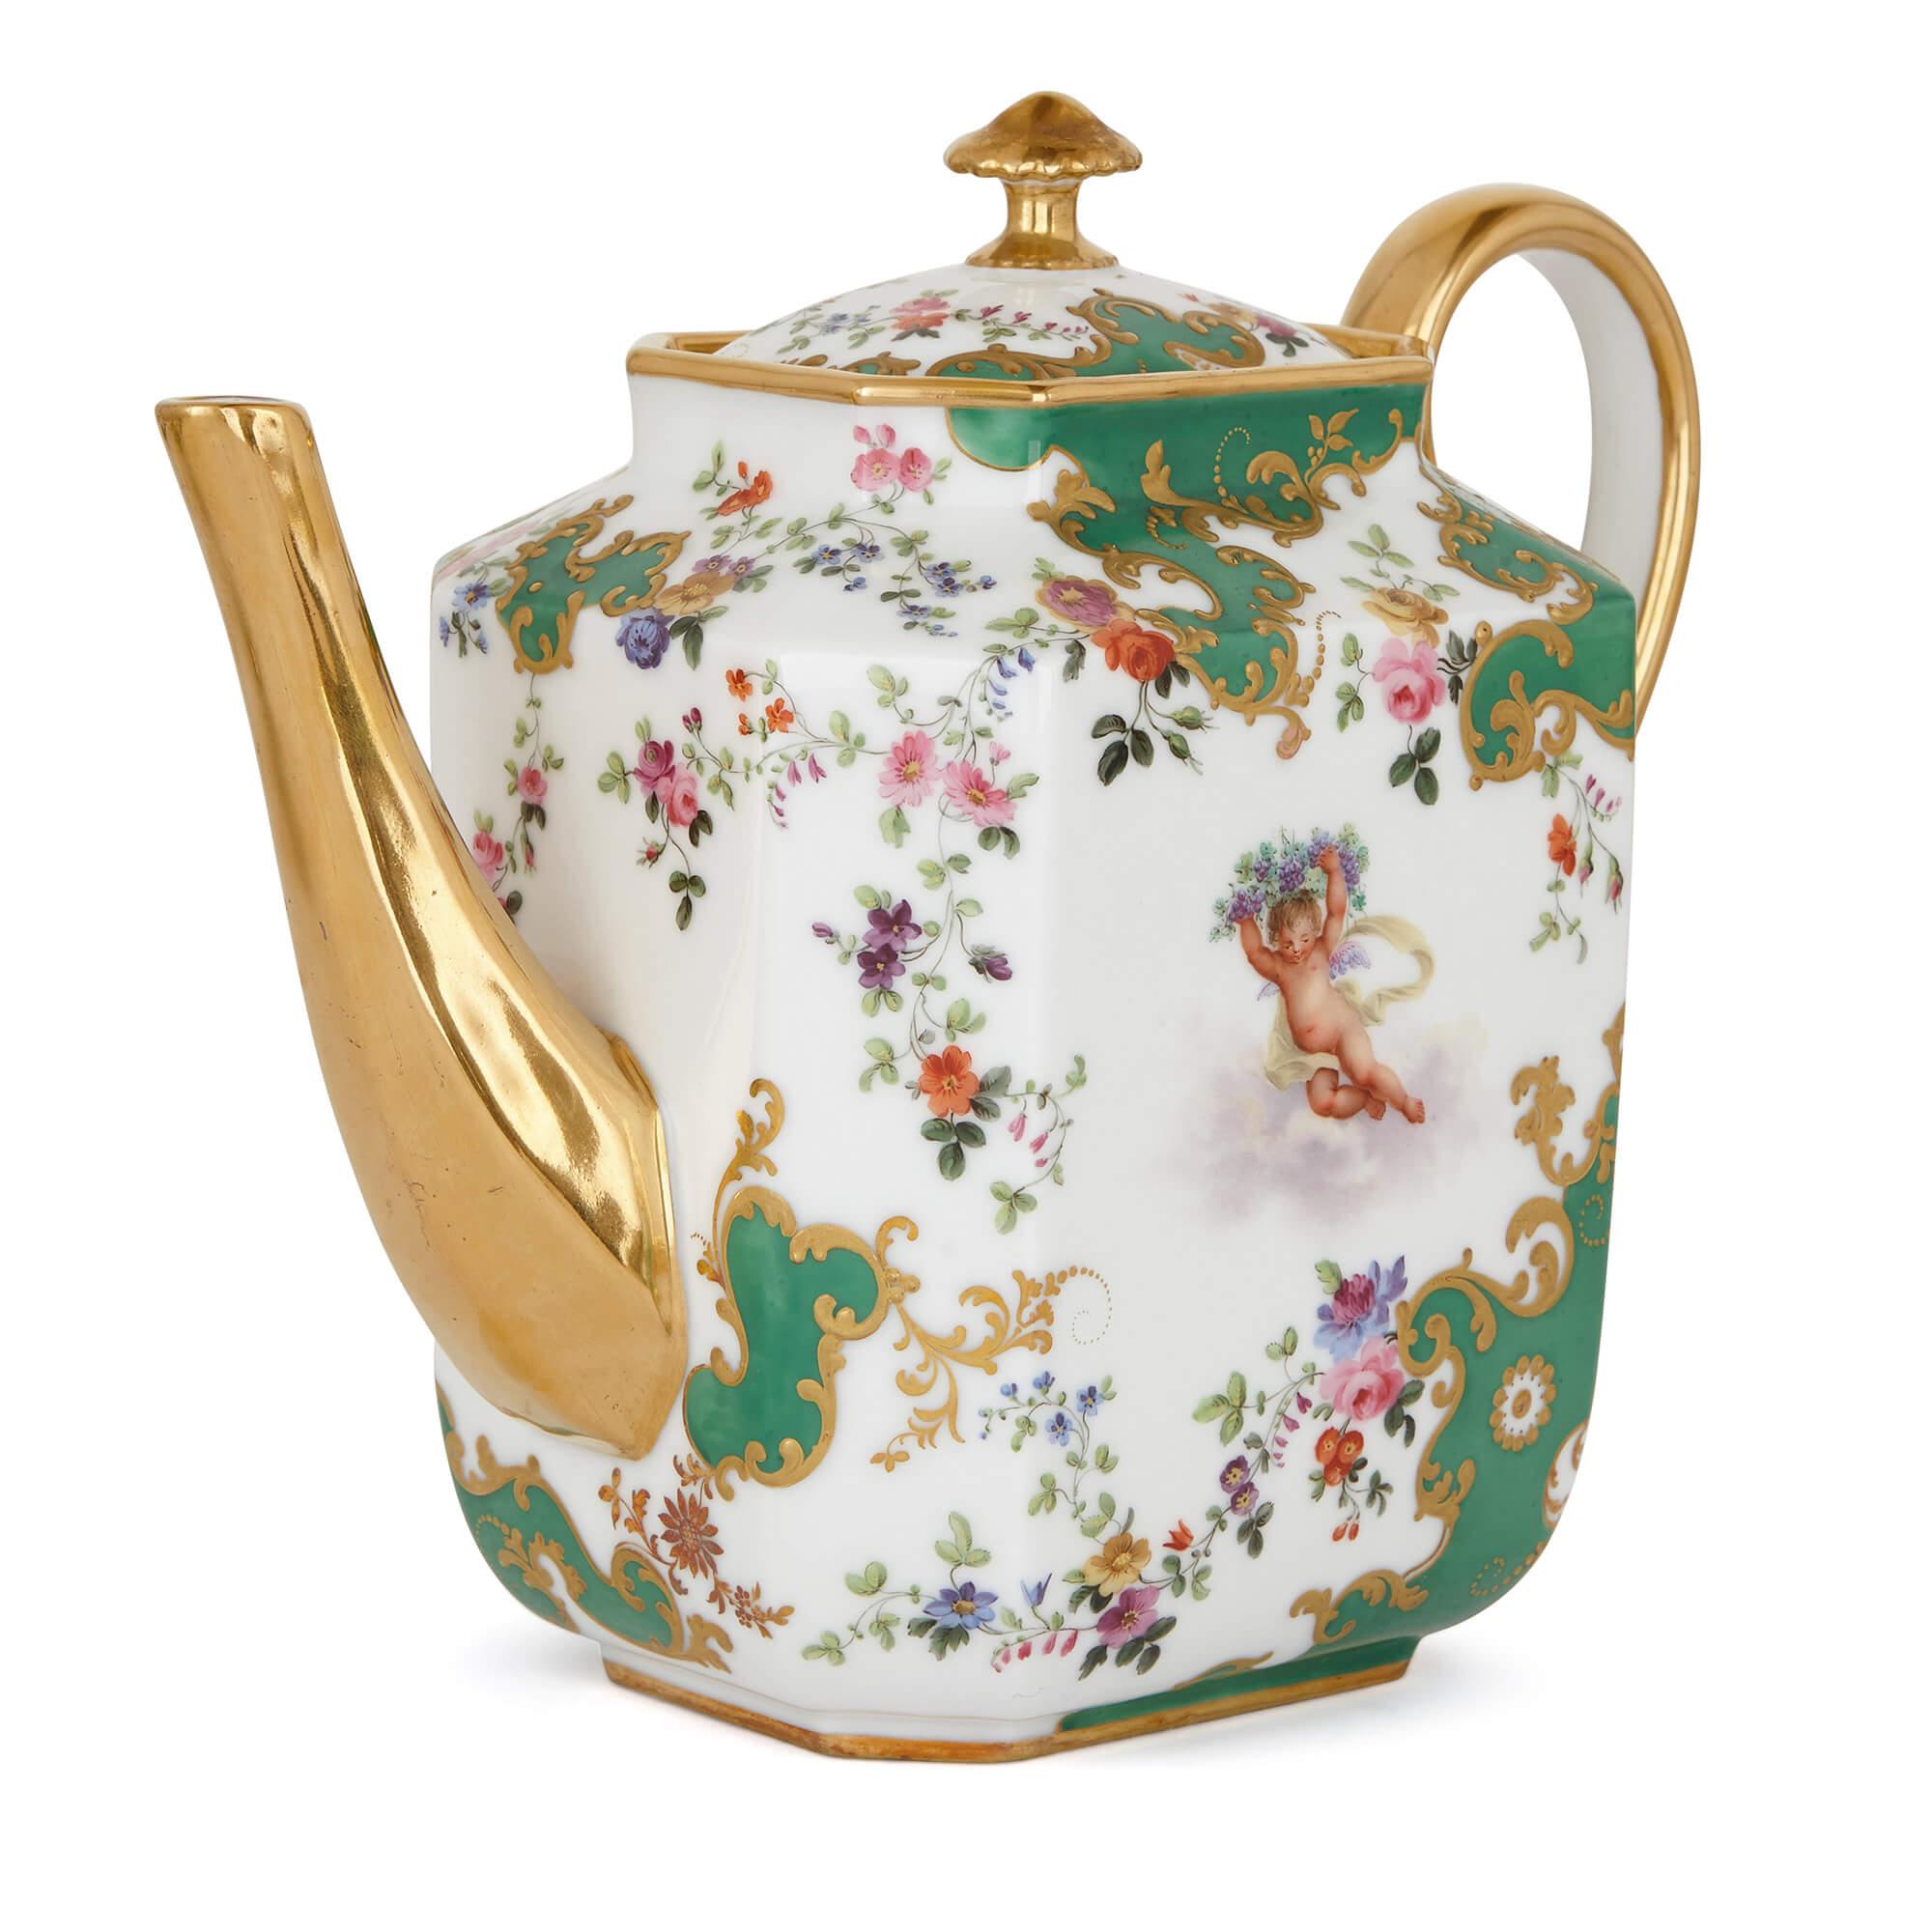 This attractive porcelain tea service possesses a wonderful 19th century charm, thanks to its finely-detailed sevres-style decorations and stylish green and white color scheme. There are 23 pieces in total, including a teapot, a milk jug, a sugar